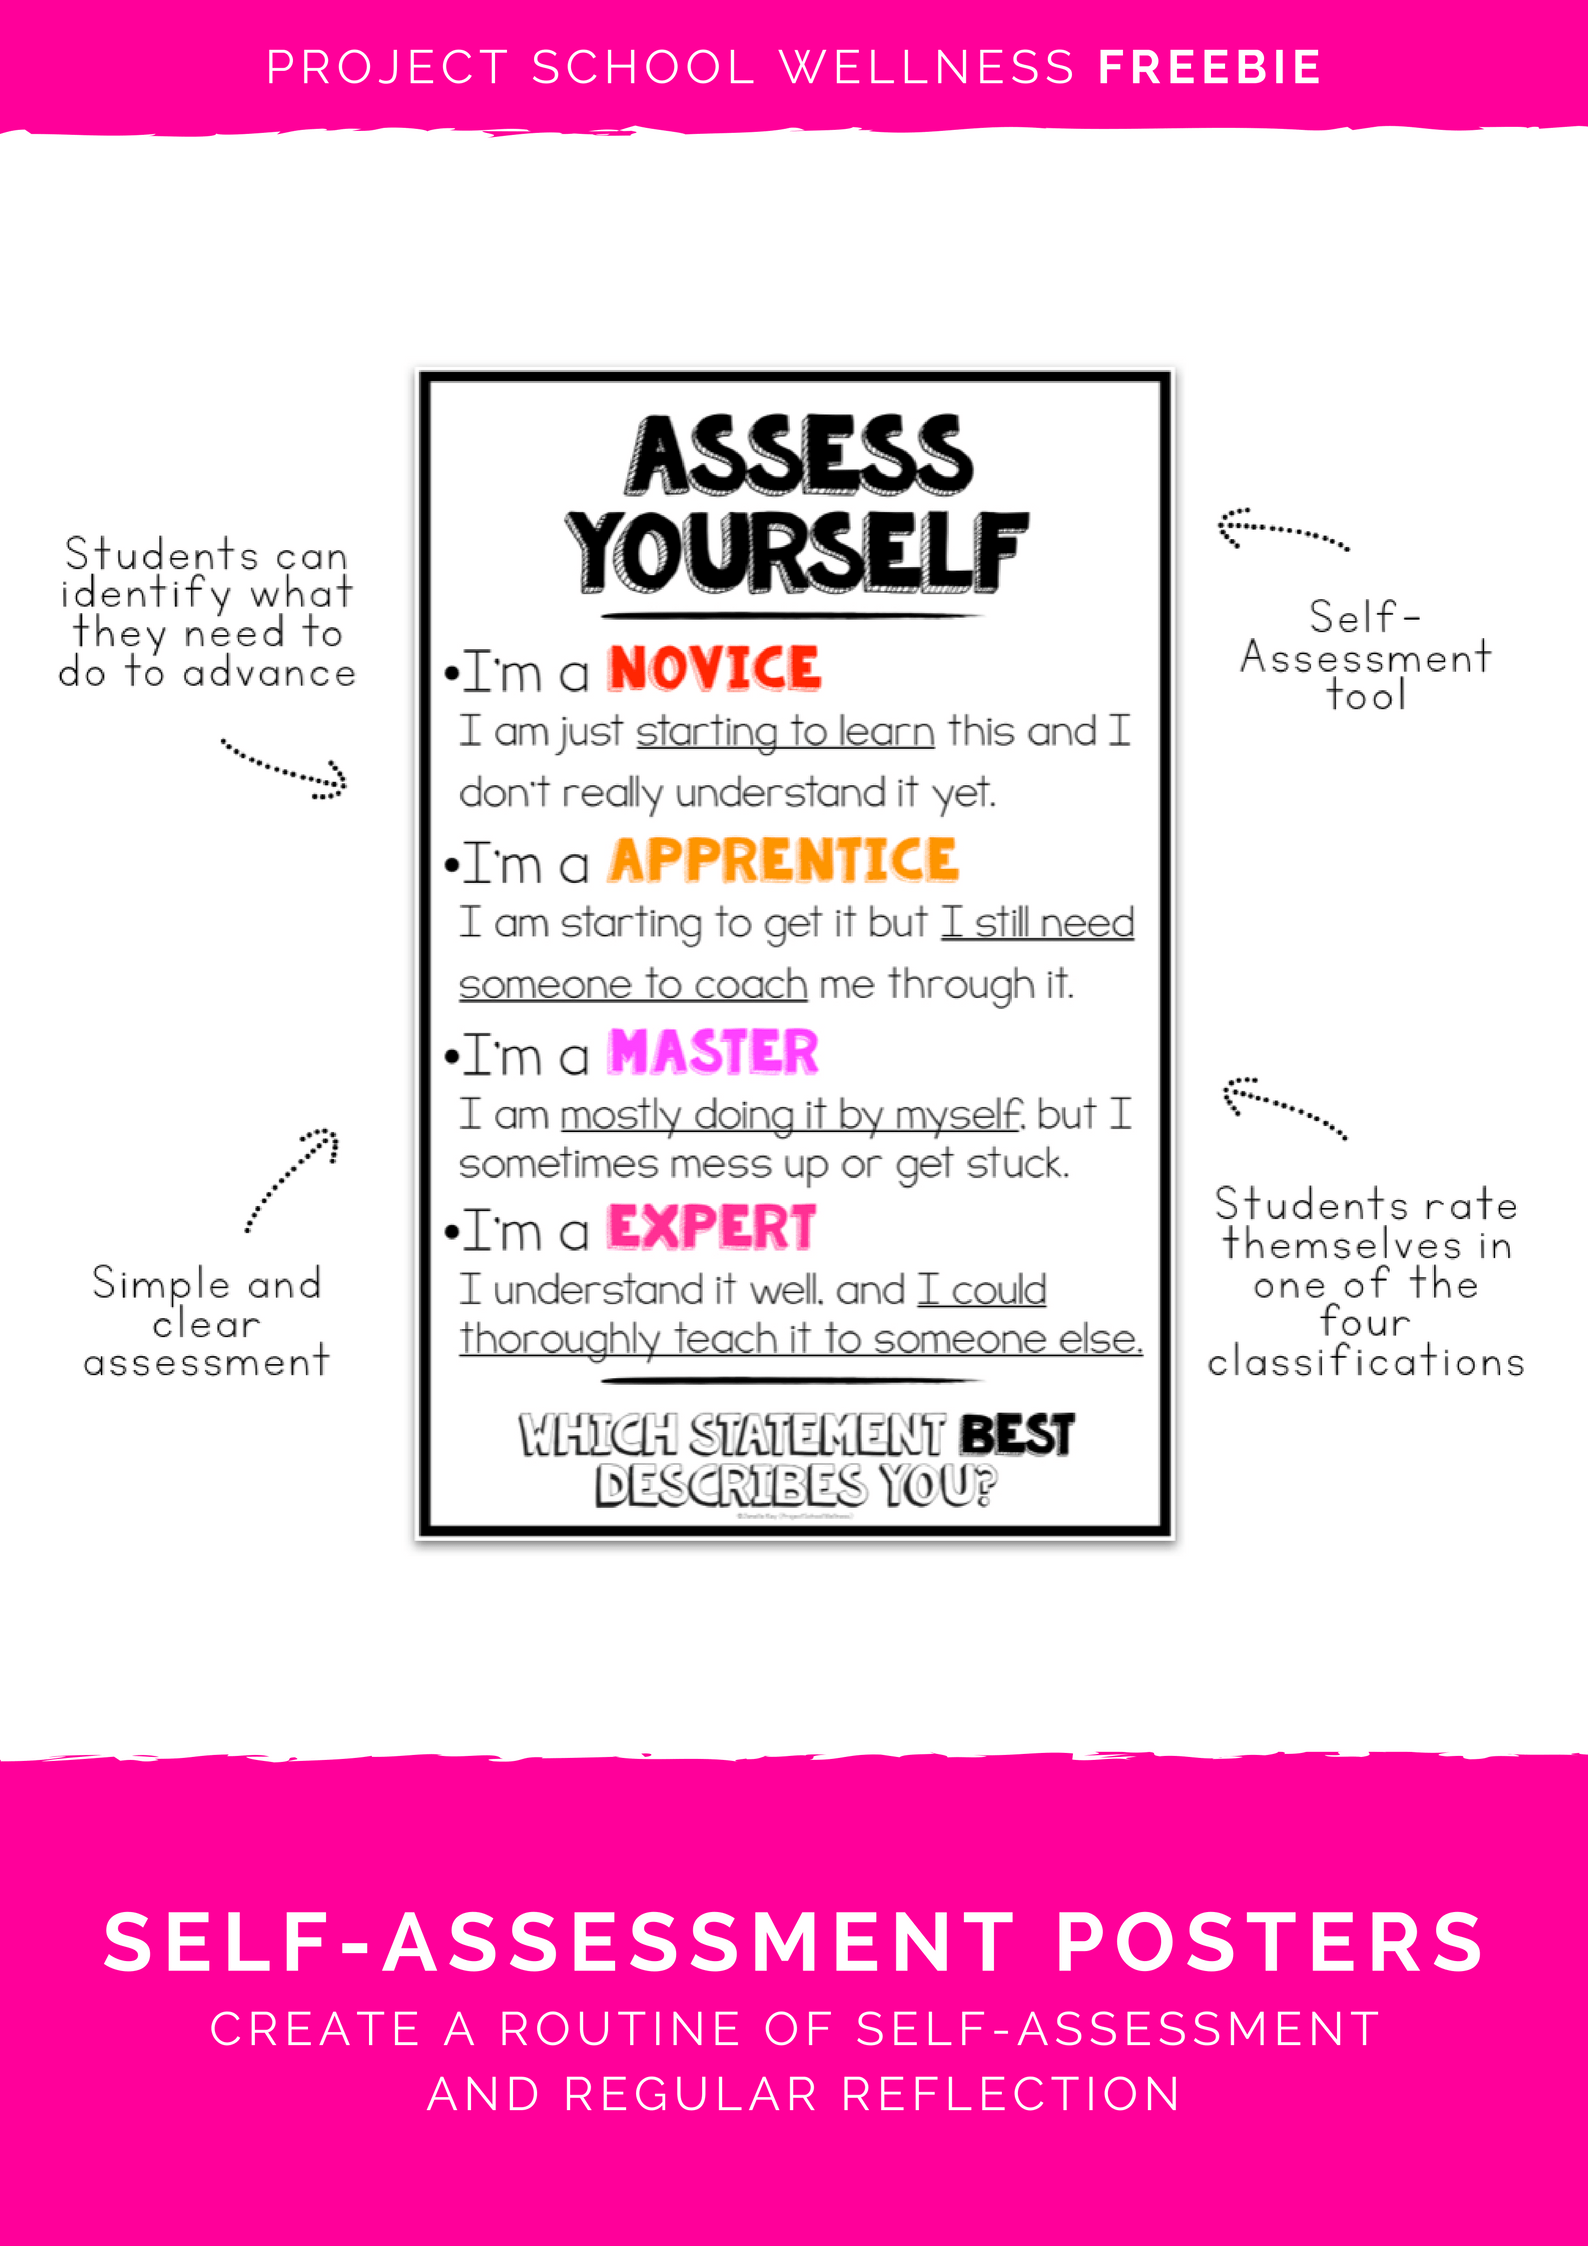 Download this mastery chart posters! Hey Teachers, use this Project School Wellness freebie to help students create a routine of self-assessment and reflection!